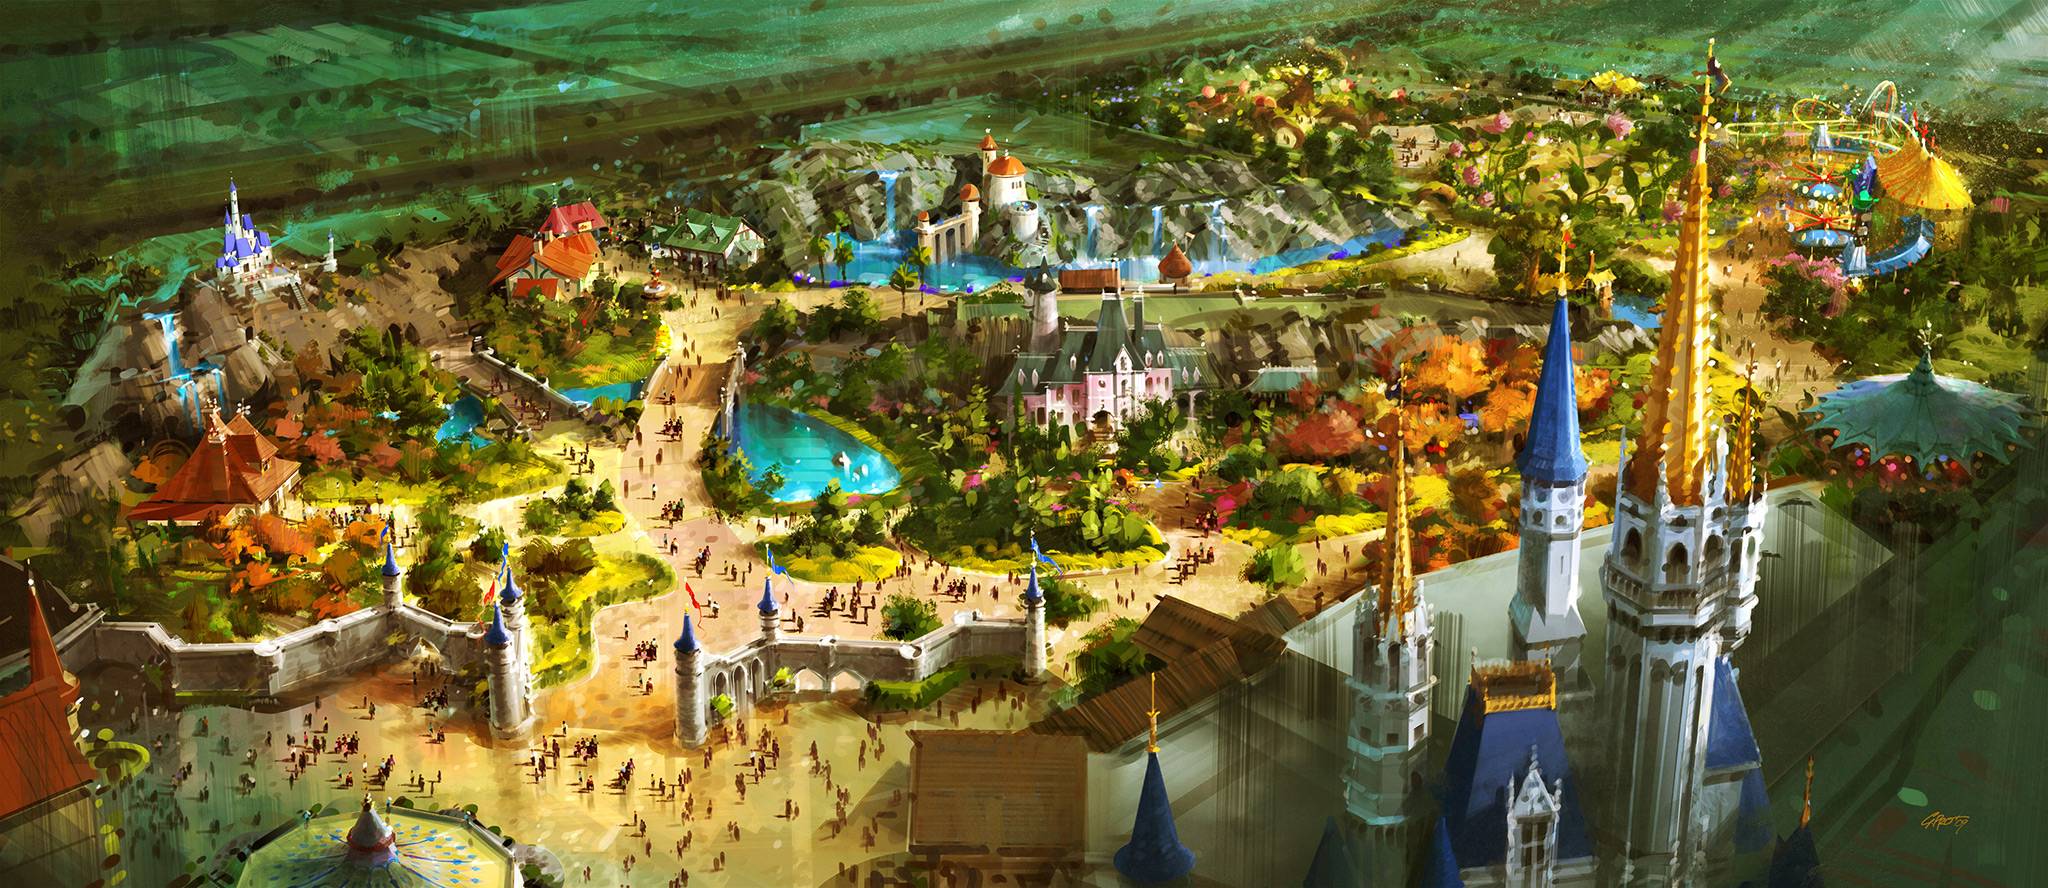 A bird's-eye view of the vastly-expanded Fantasyland at the Magic Kingdom in Walt Disney World which will offer Guests a new land of enchantment in a magical fairy tale forest just beyond the castle walls. 